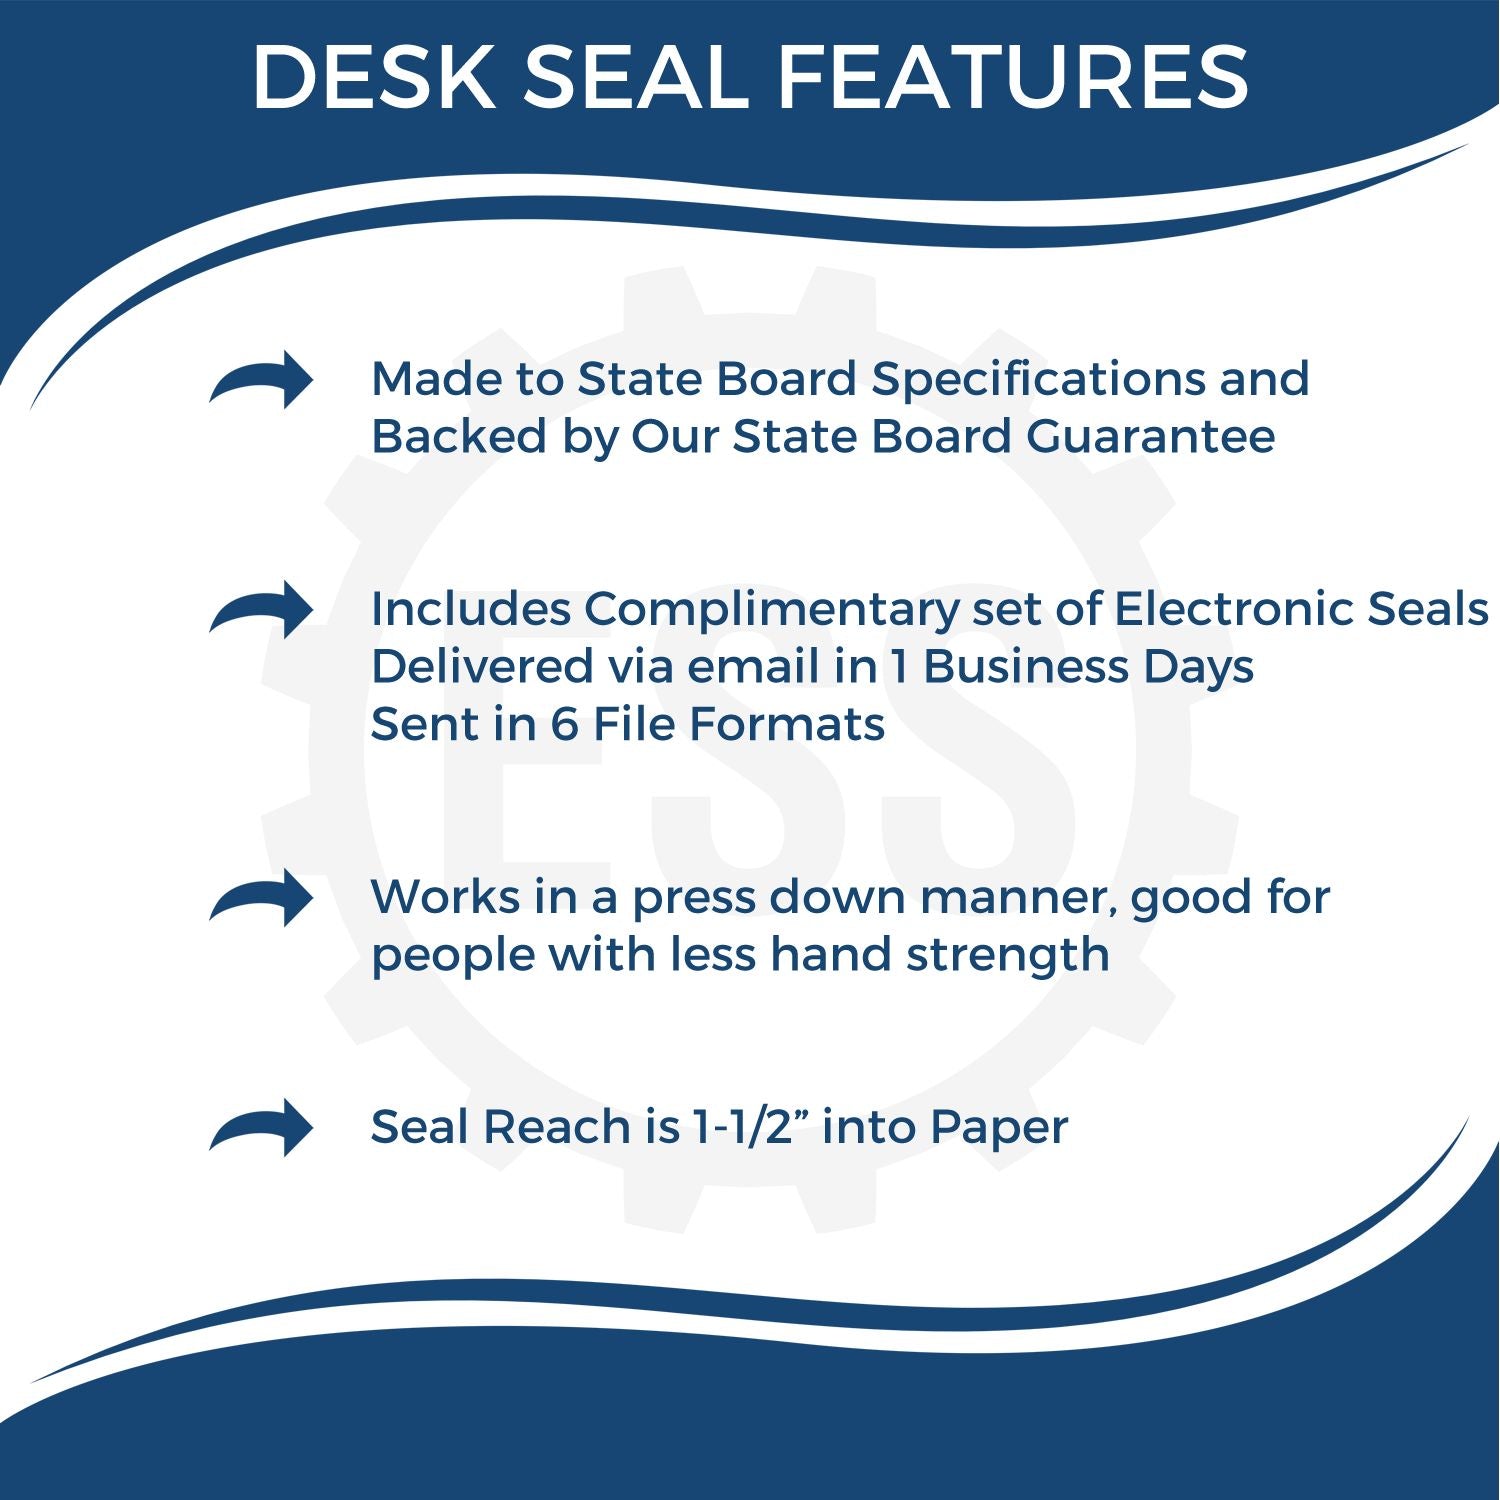 A picture of an infographic highlighting the selling points for the Tennessee Desk Surveyor Seal Embosser